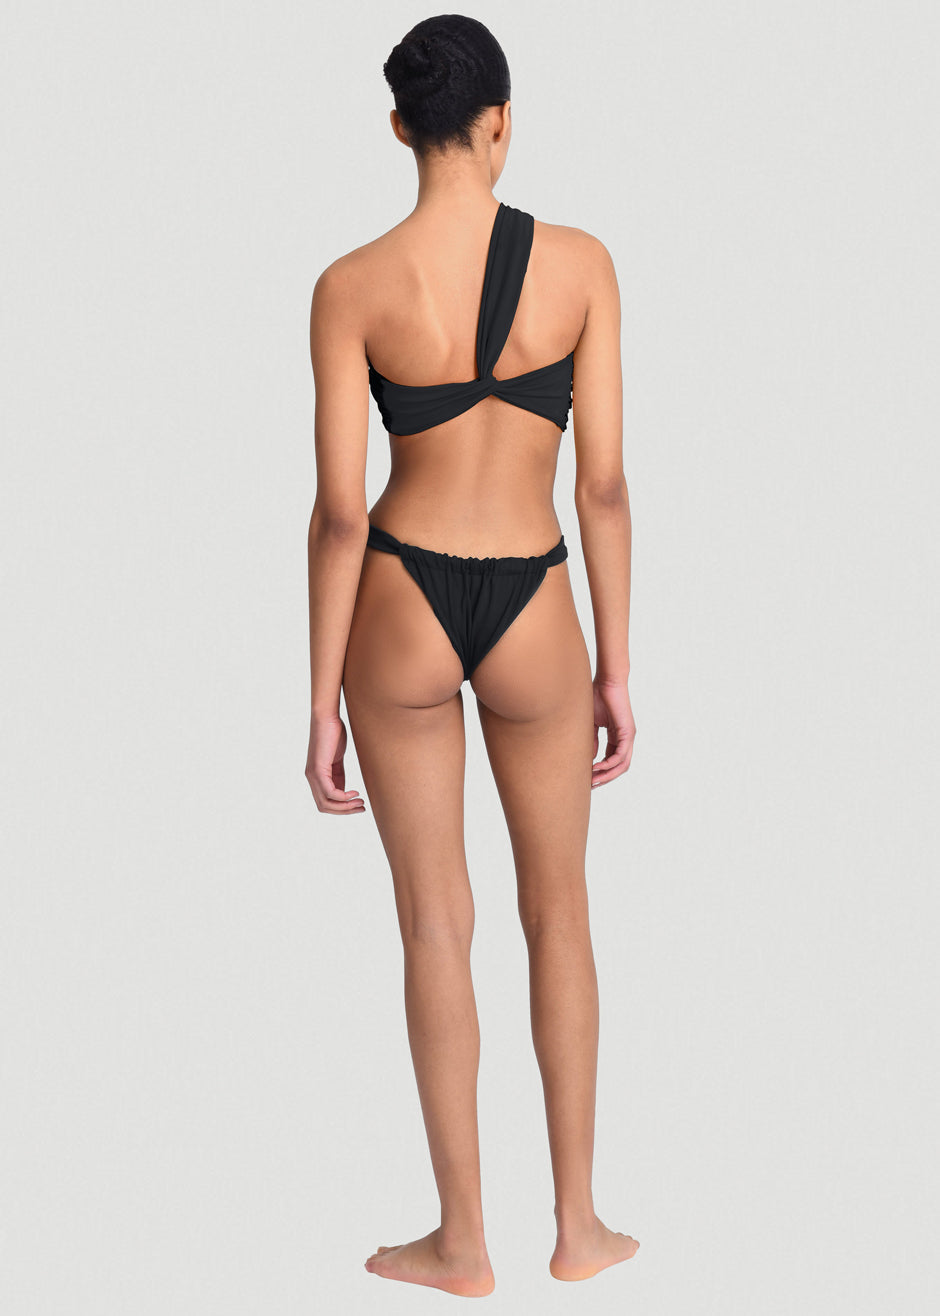 Aexae Ruched Swimsuit Bottoms - Black - 3